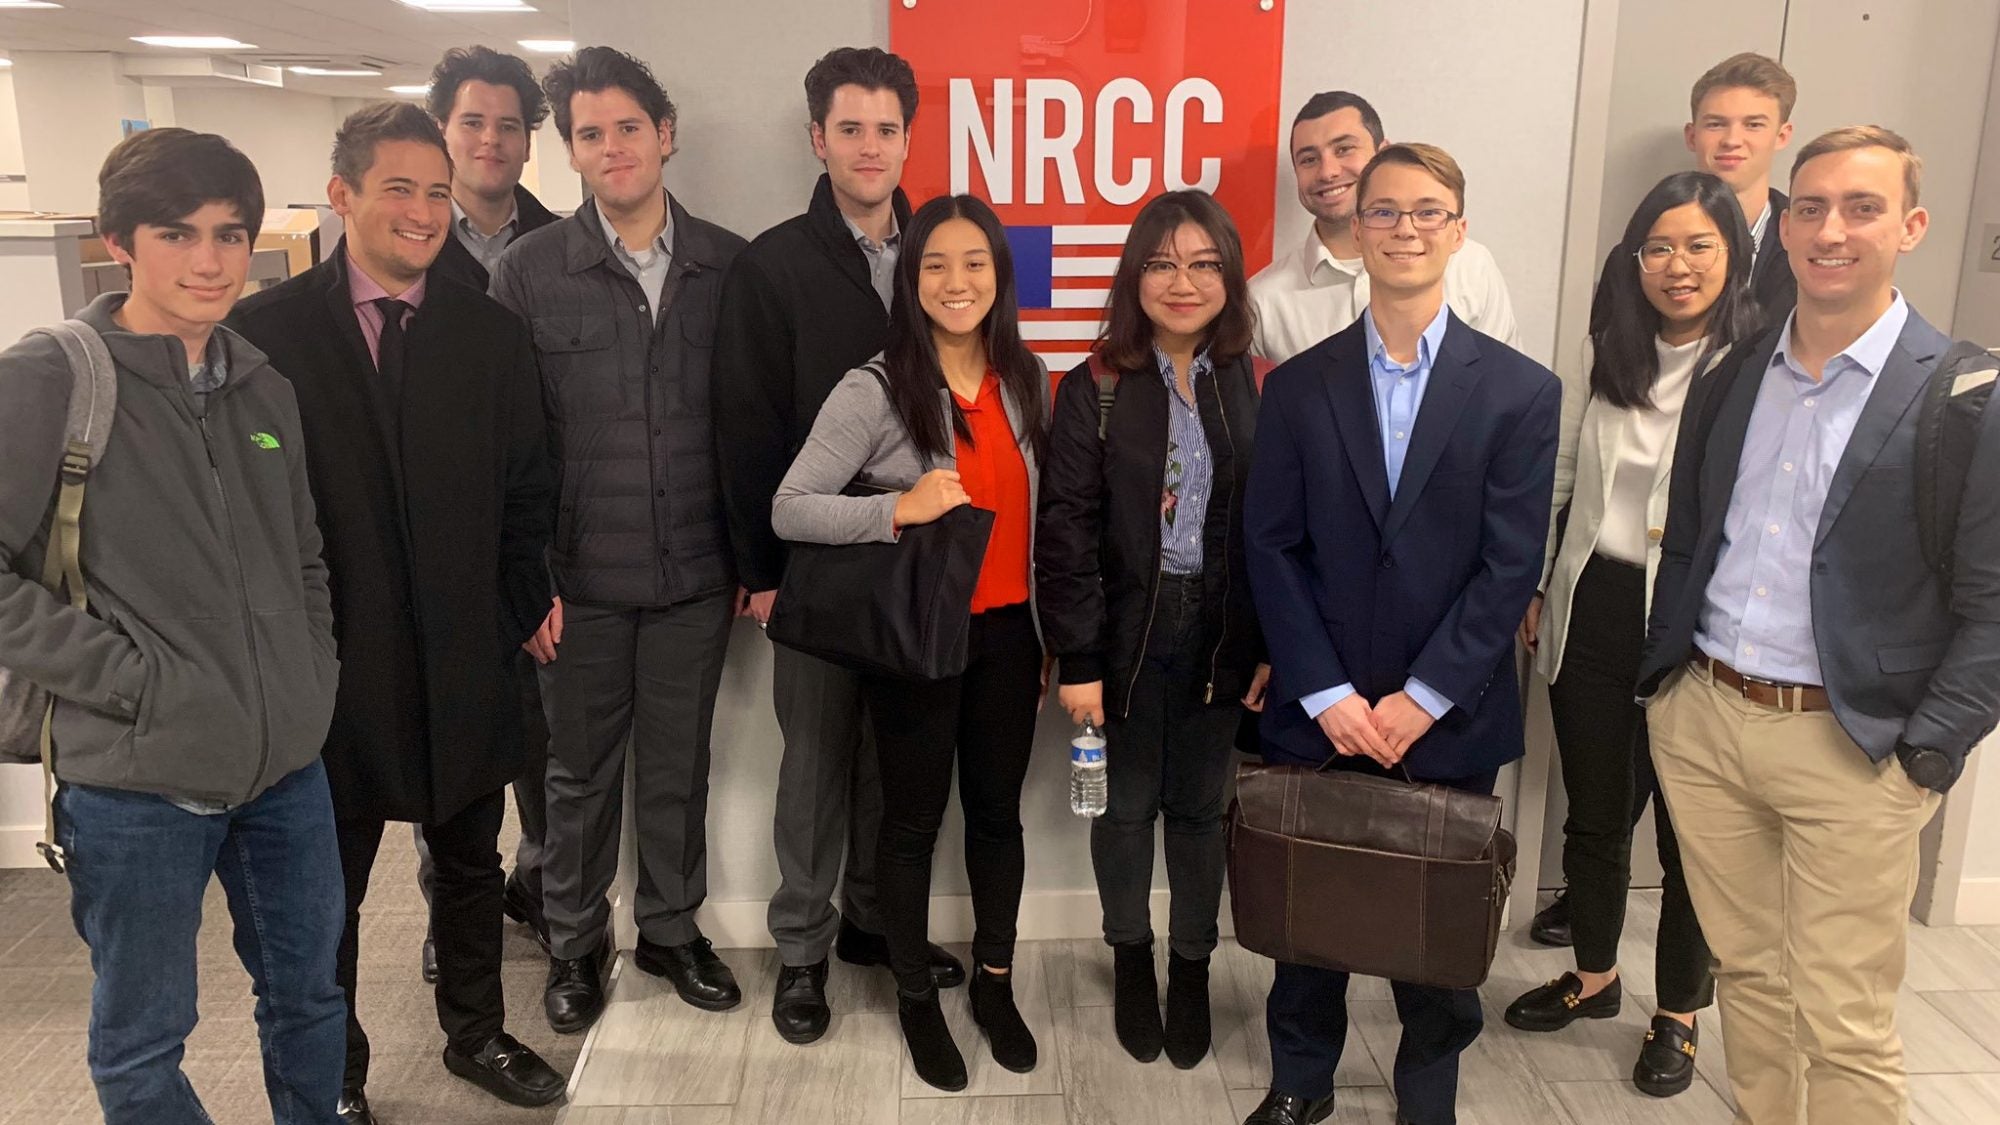 Students at the NRCC office in front of logo.